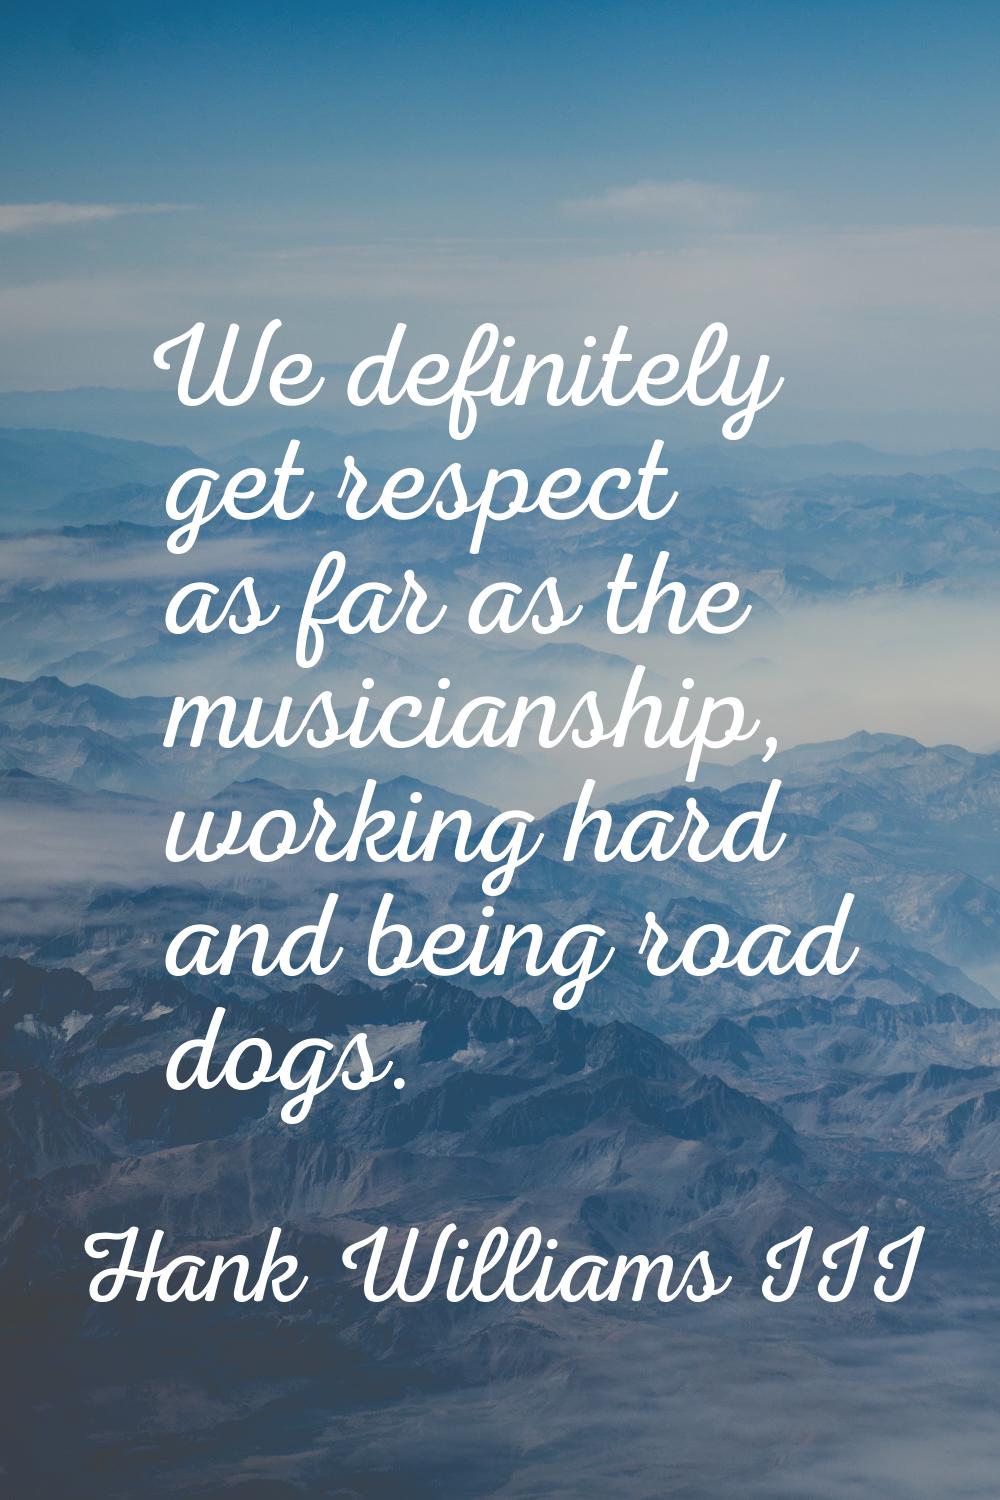 We definitely get respect as far as the musicianship, working hard and being road dogs.